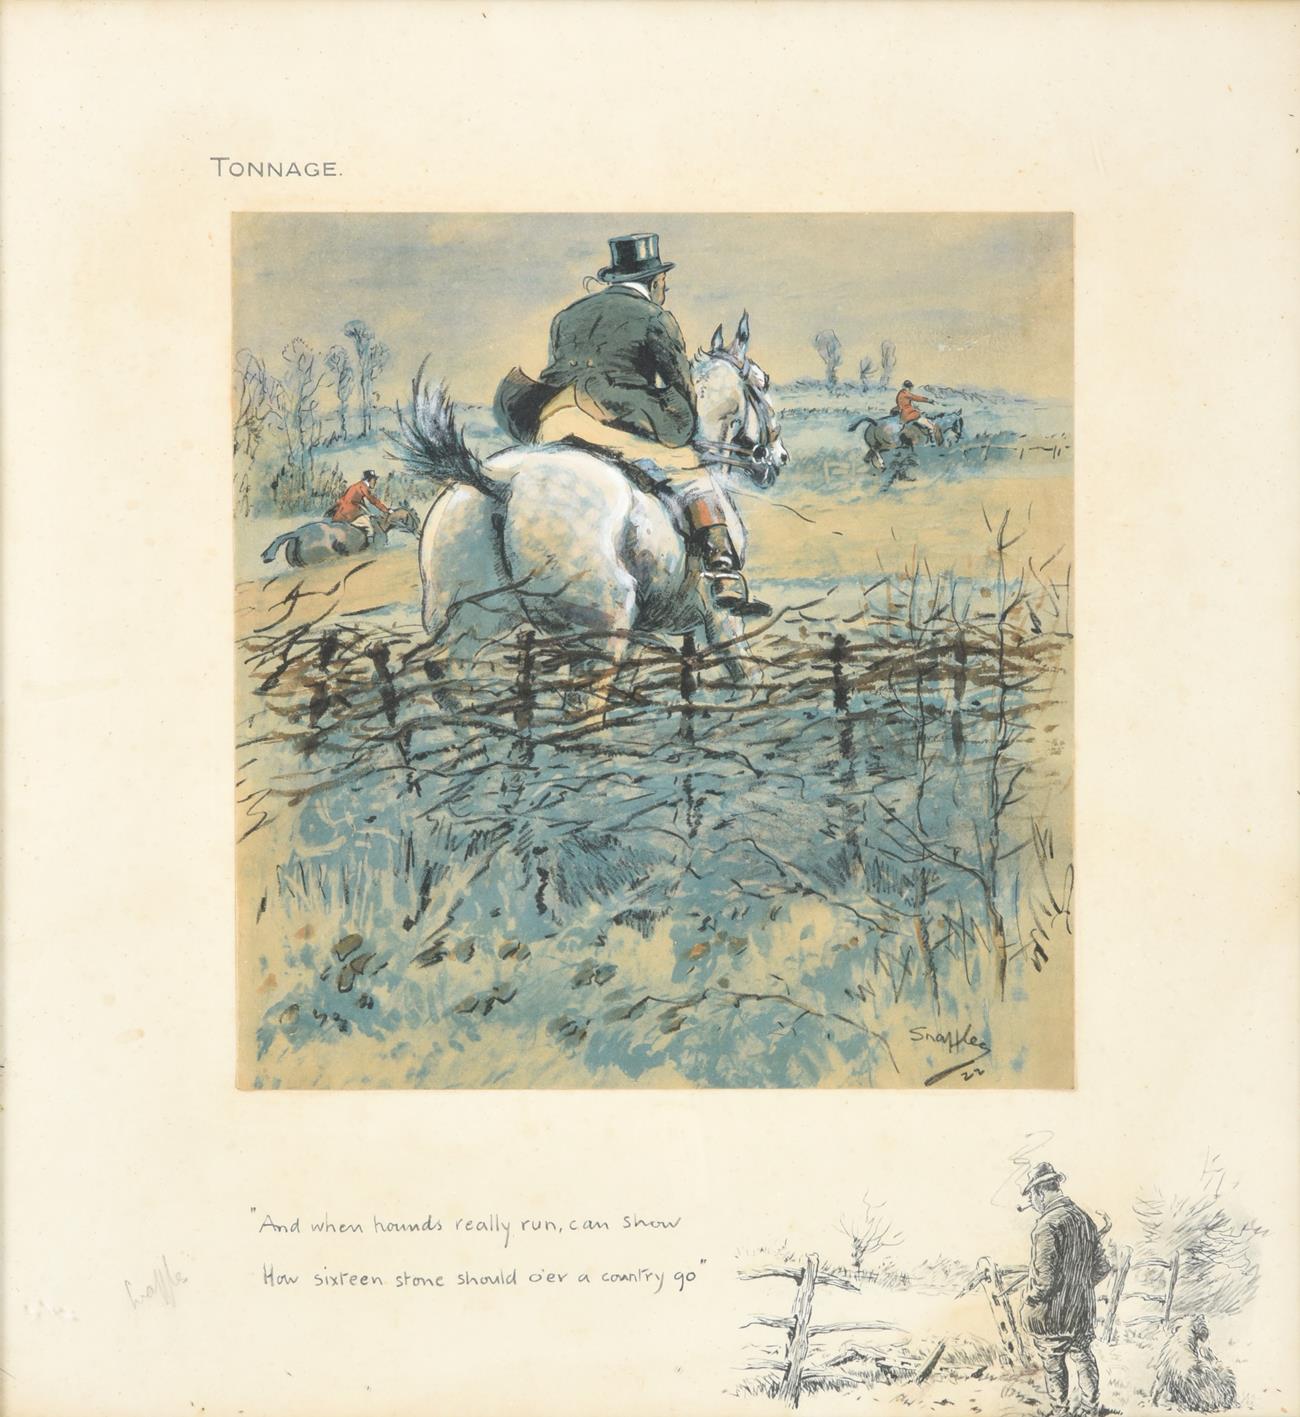 Lot 1009 - Charles Johnson Payne ''Snaffles'' (1884-1967) ''Tonnage - and when Hounds really run, can show how